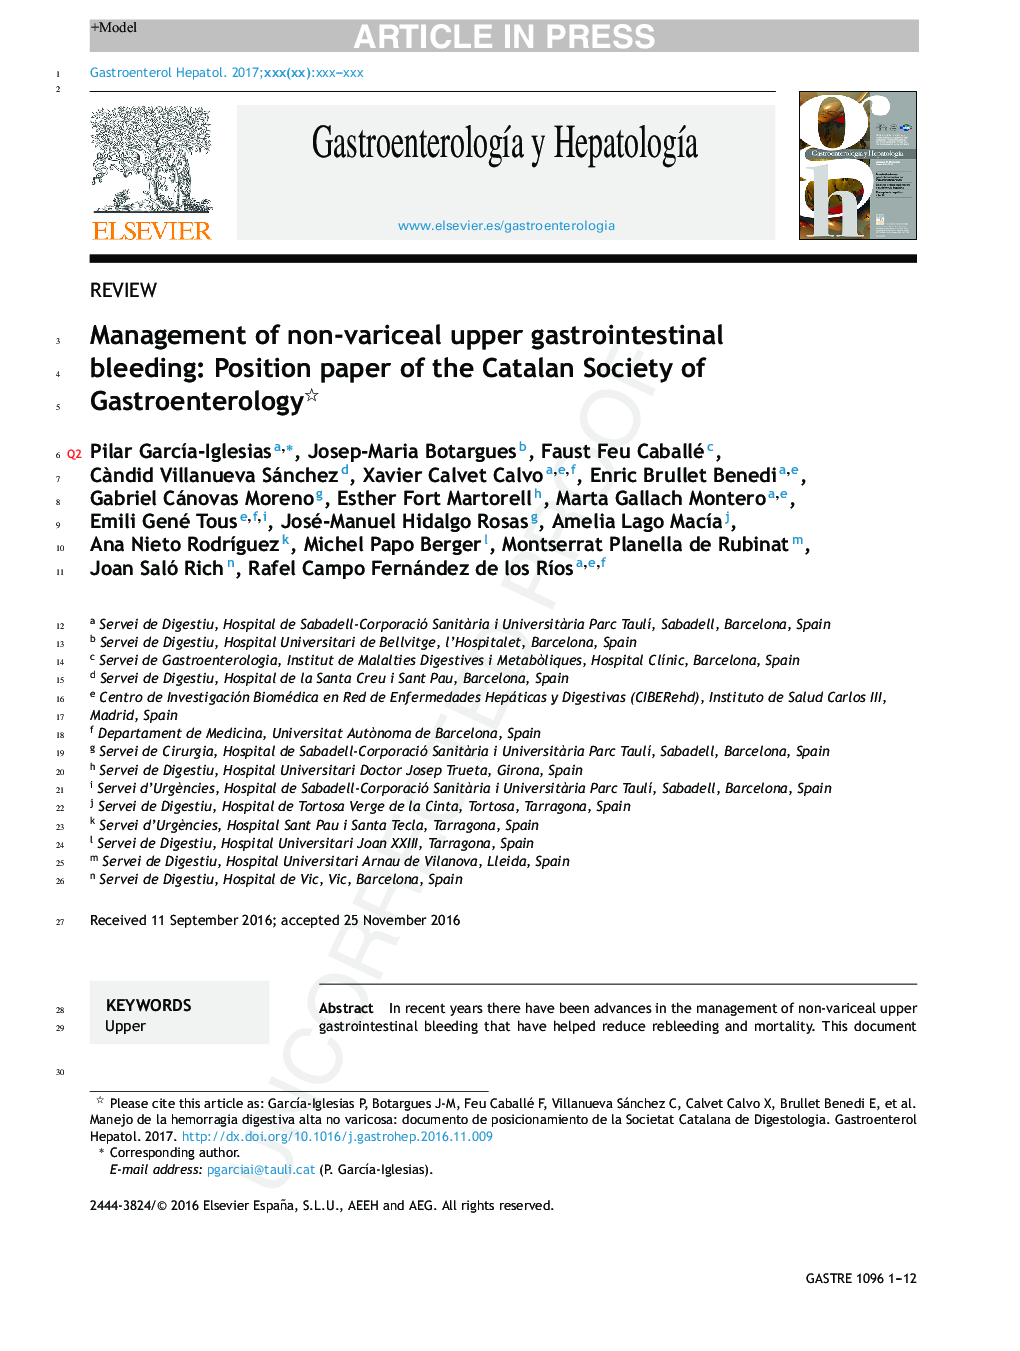 Management of non variceal upper gastrointestinal bleeding: Position paper statement of the Catalan Society of Gastroenterology